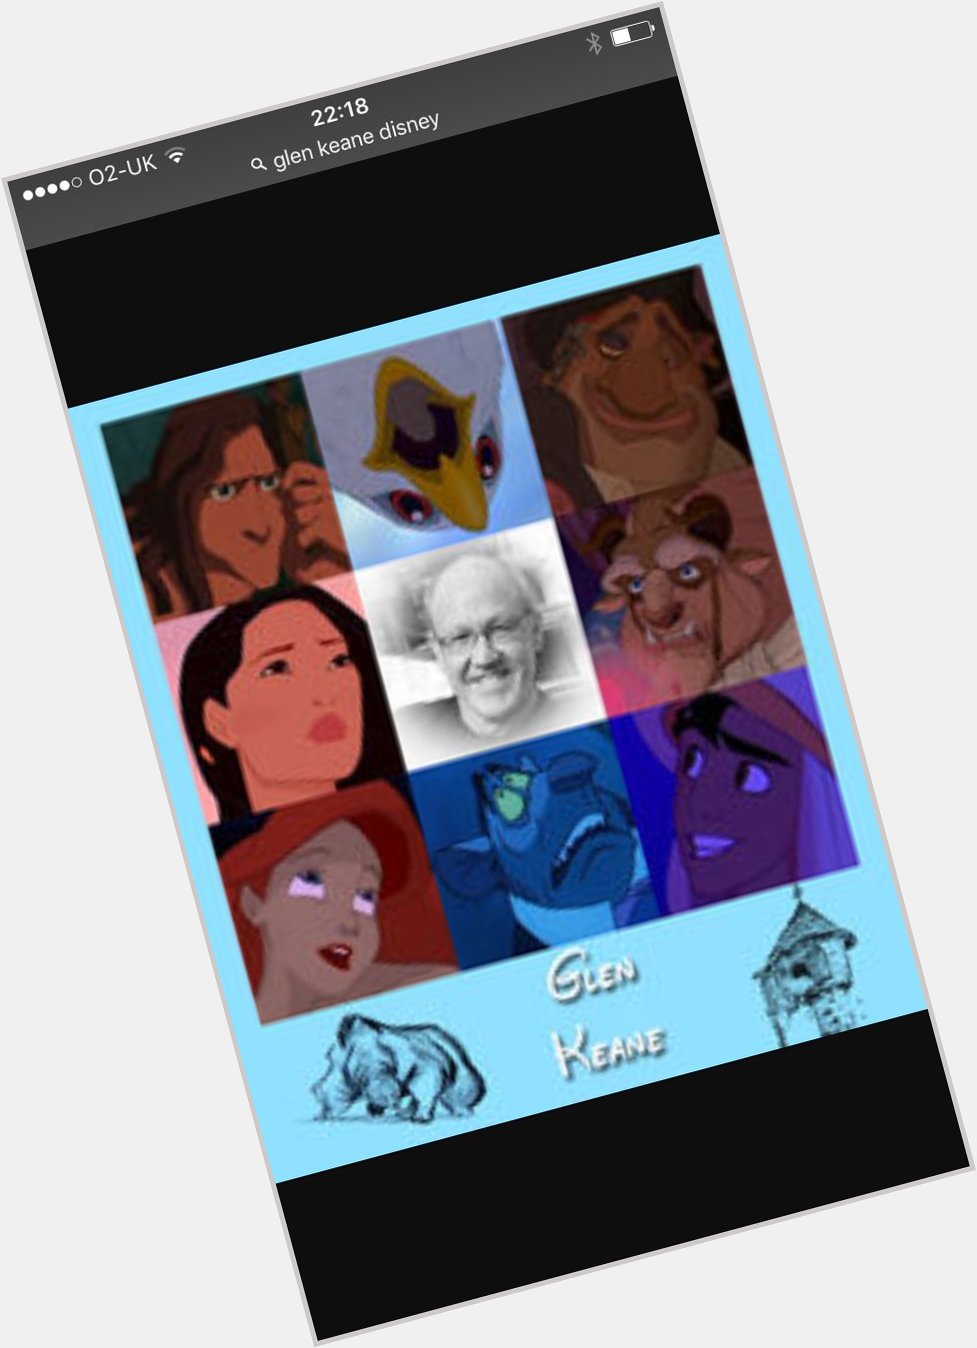 Happy birthday Glen Keane here\s a tribute to the wonderful characters your brought to life at Disney 